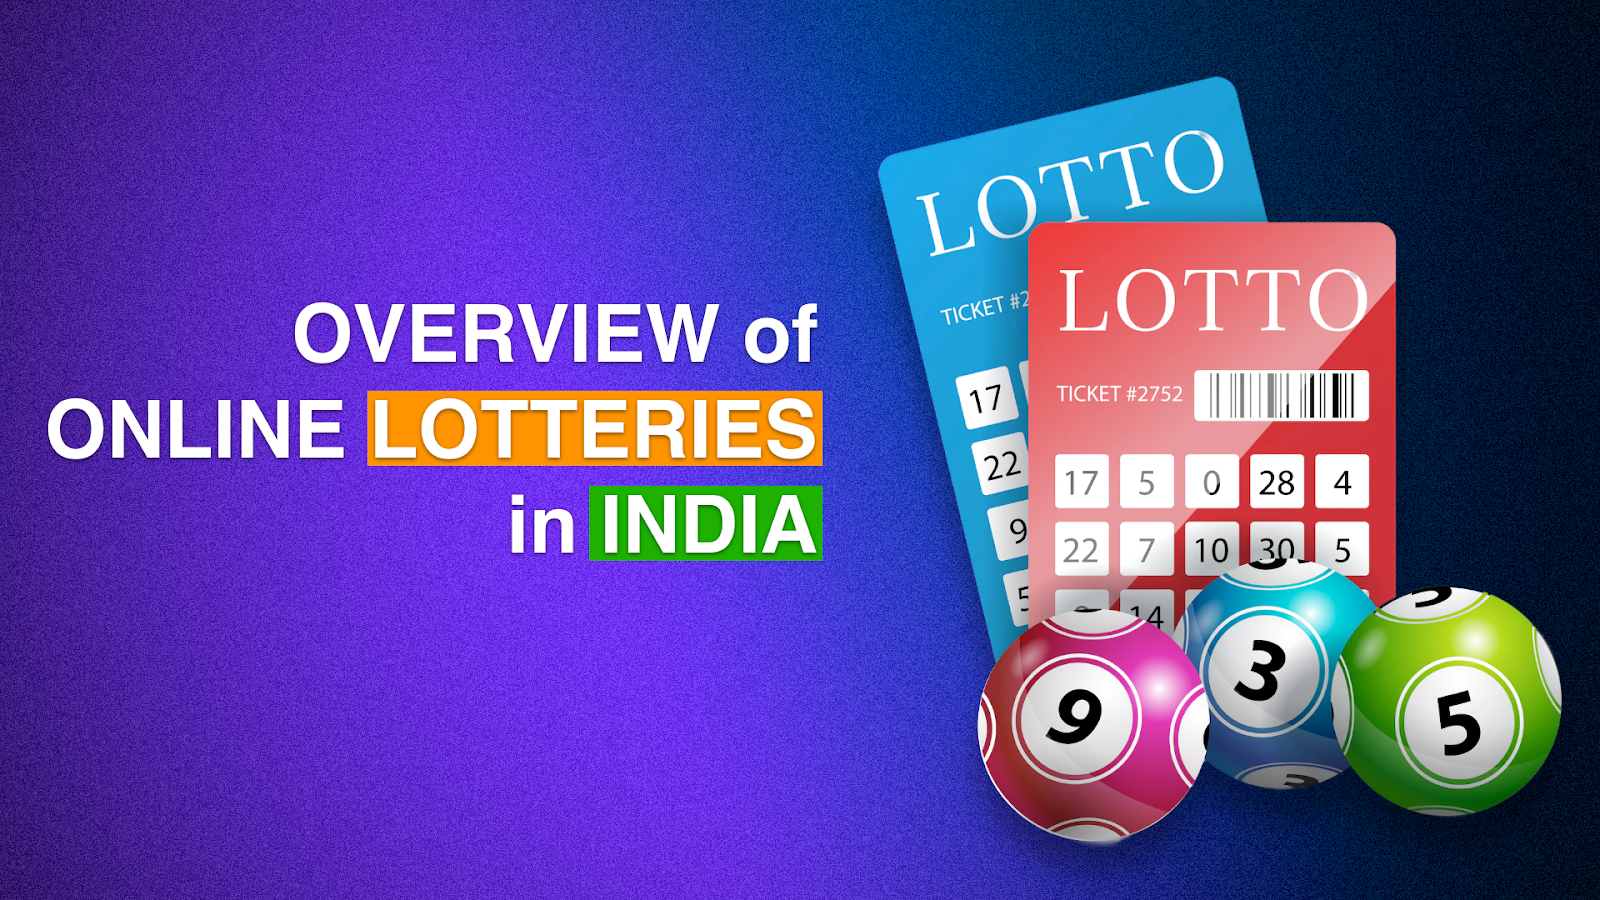 Overview of Online Lotteries in India 2022.